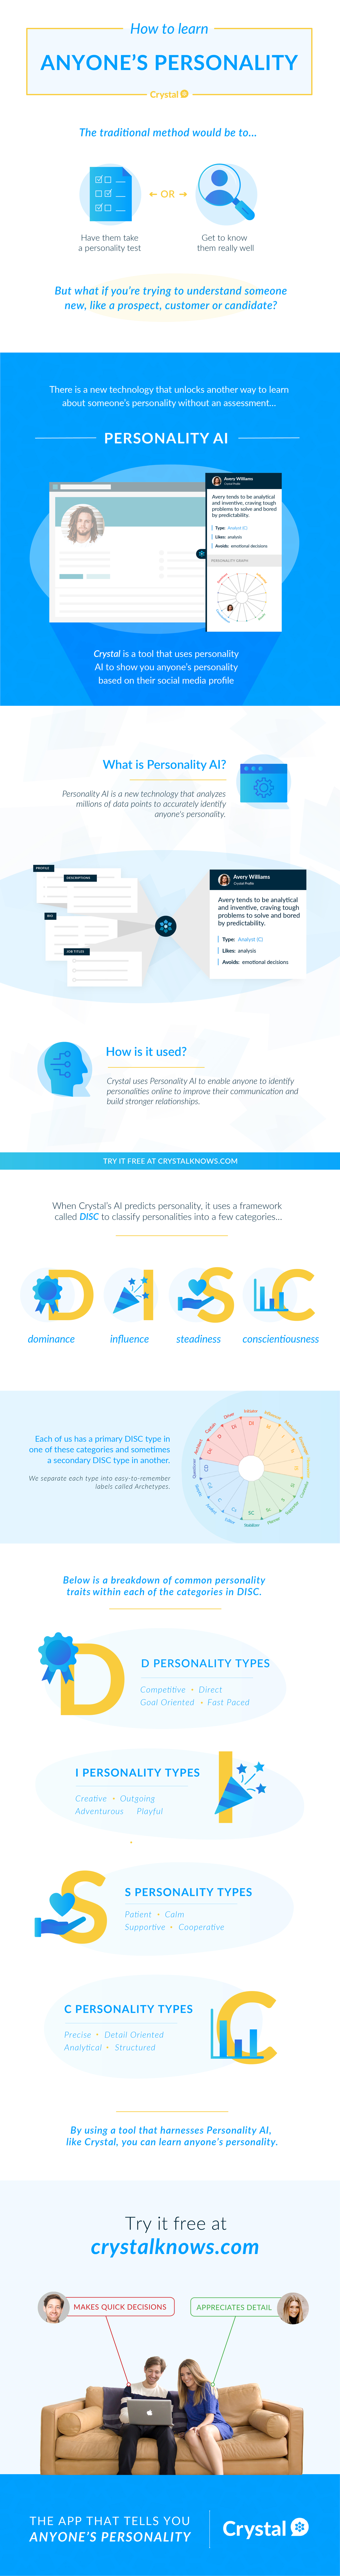 Personality AI infographic